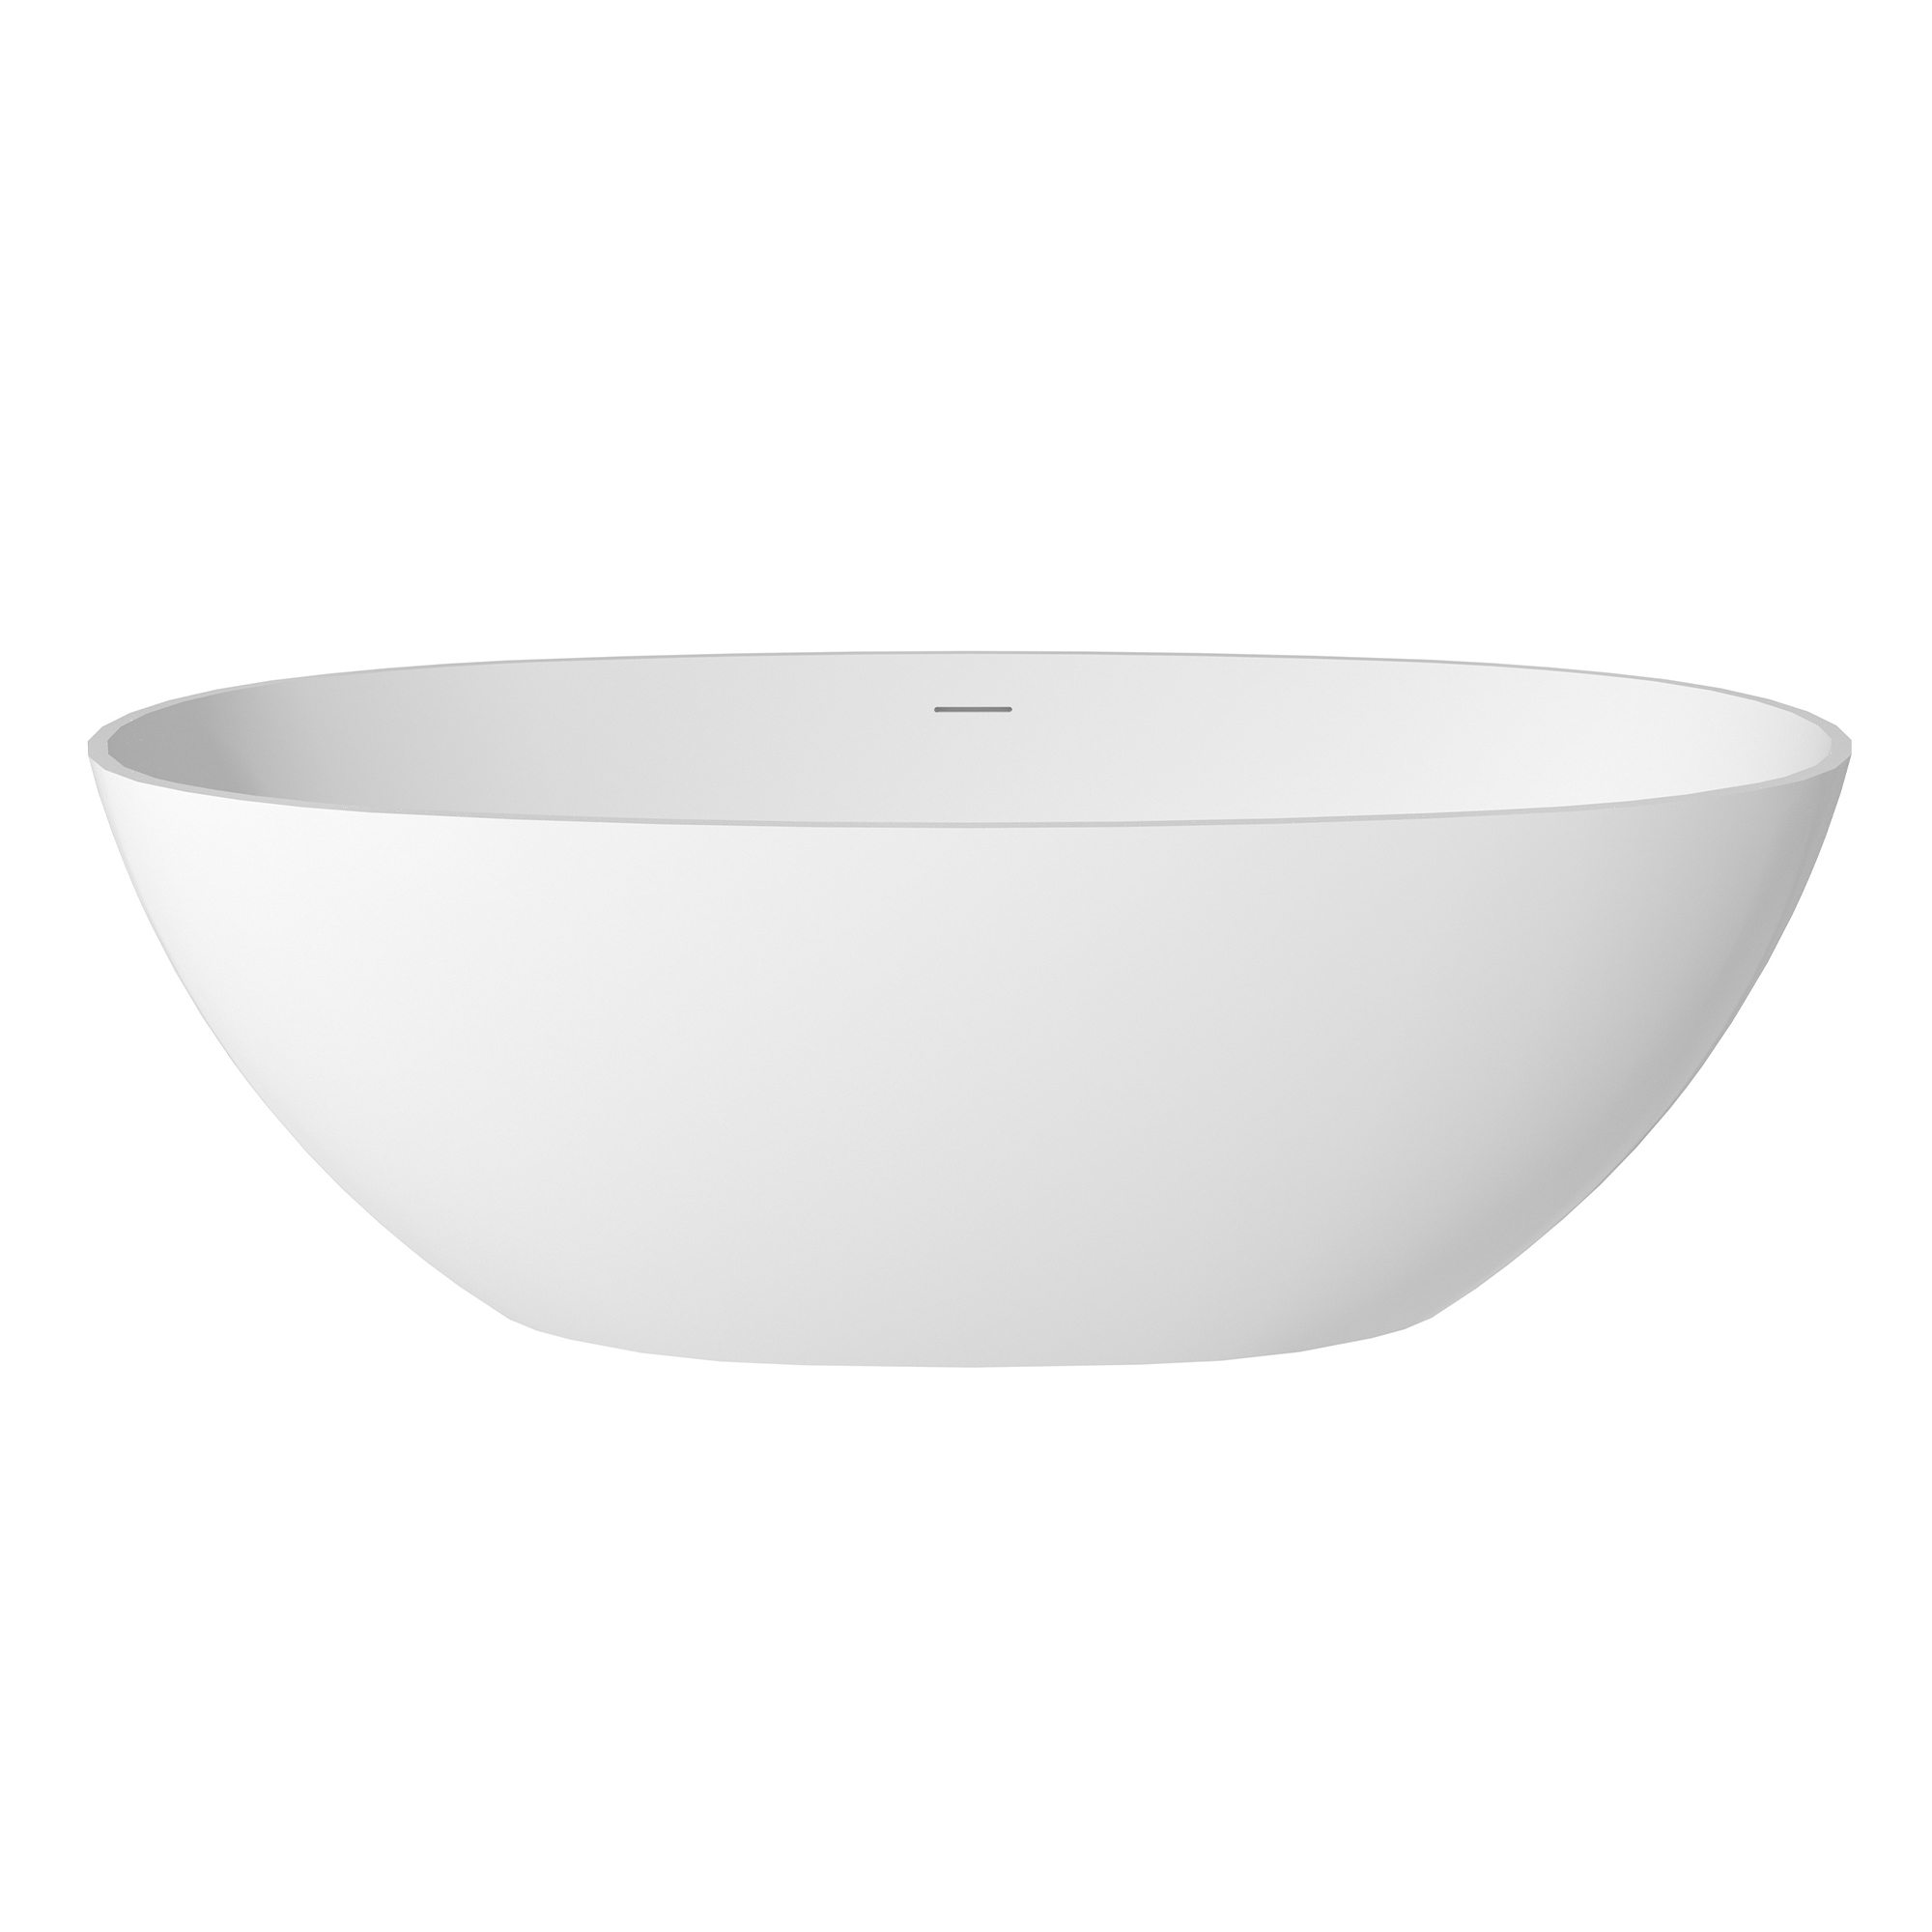 59"/63"/67" Freestanding Oval Solid Surface Stone Bathtub with Center Drain and cUPc Certification, Matte White (With/without Tub Faucet)